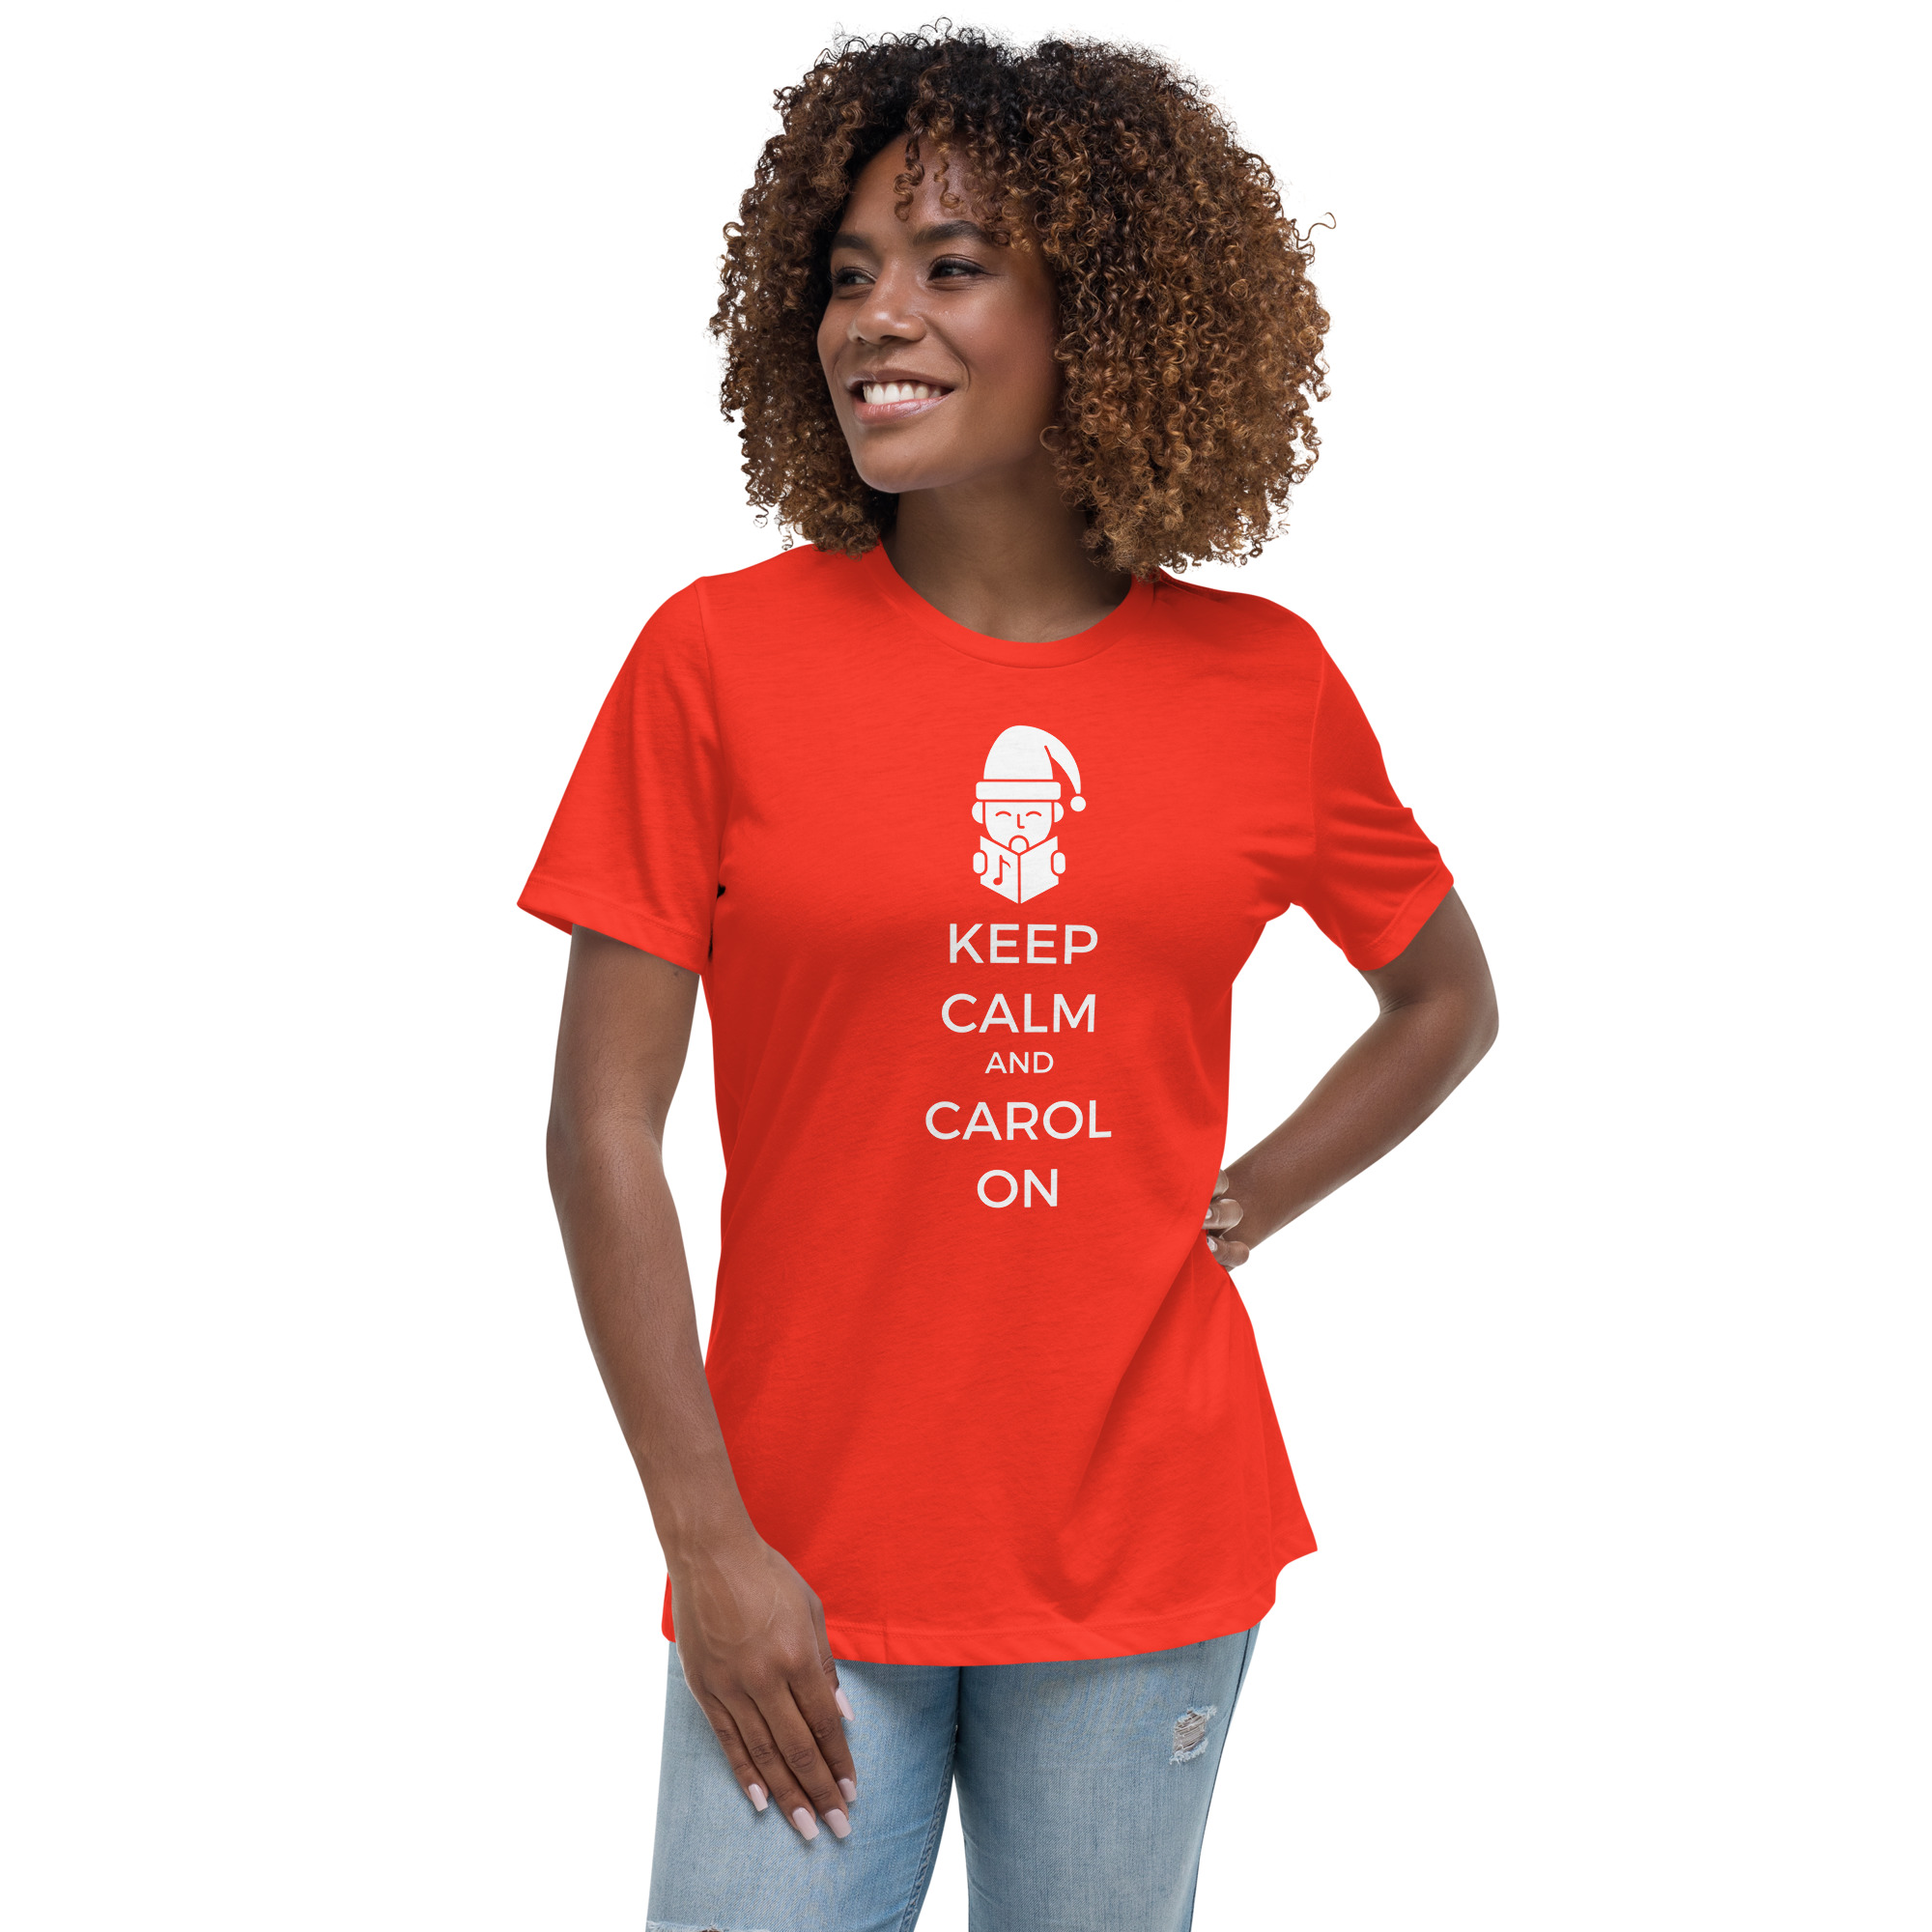 Model for poppy color Keep Calm and Carol On women's shirt.